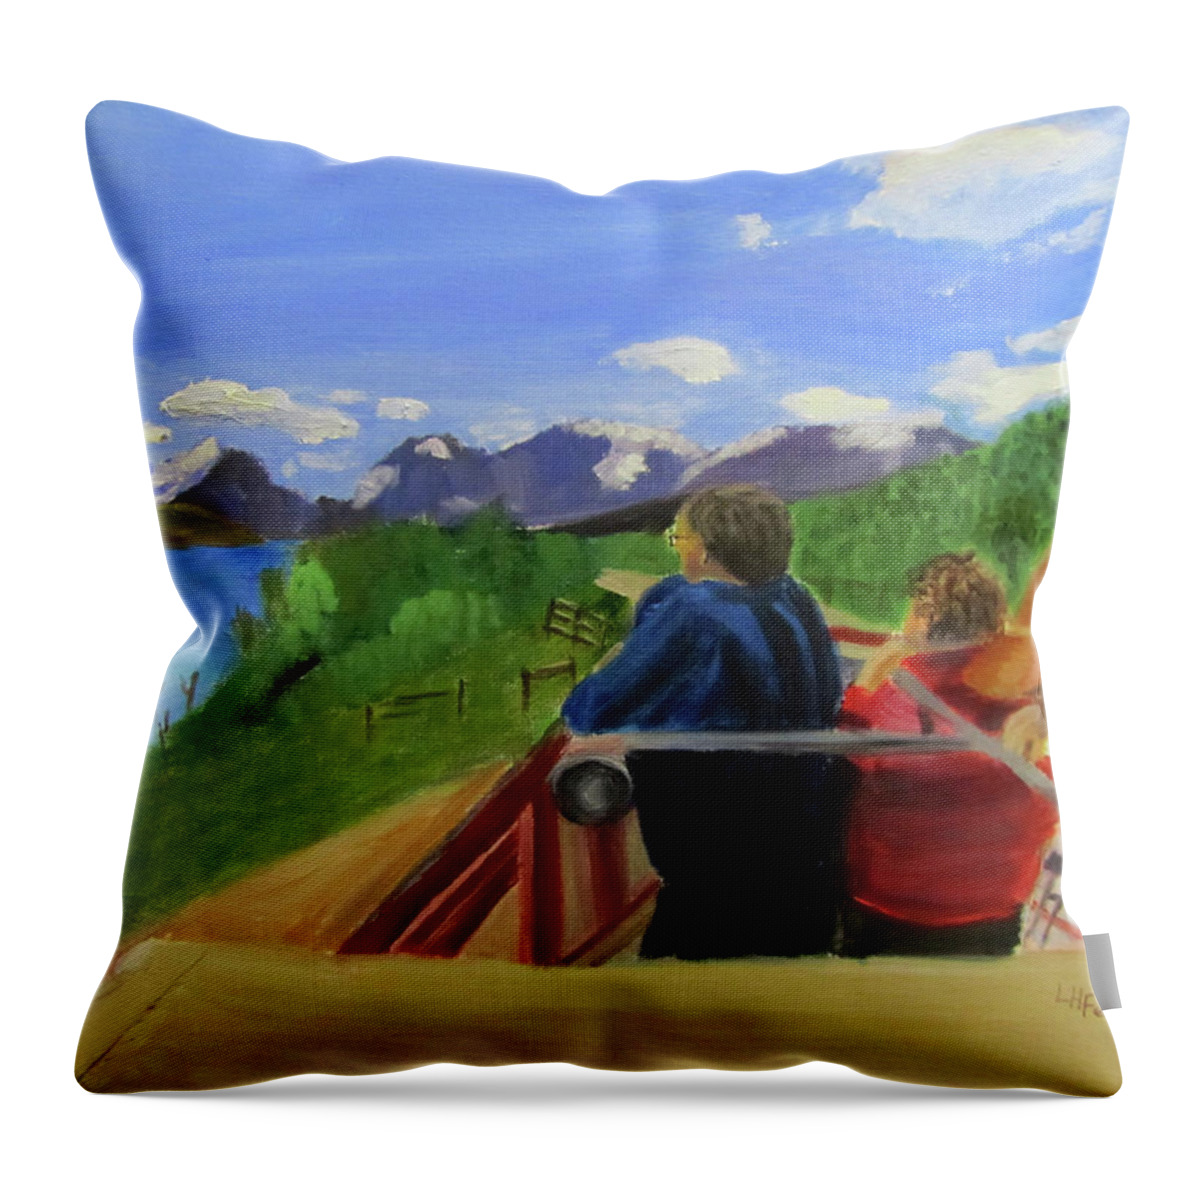 Glacier National Park Throw Pillow featuring the painting What's Out There? by Linda Feinberg